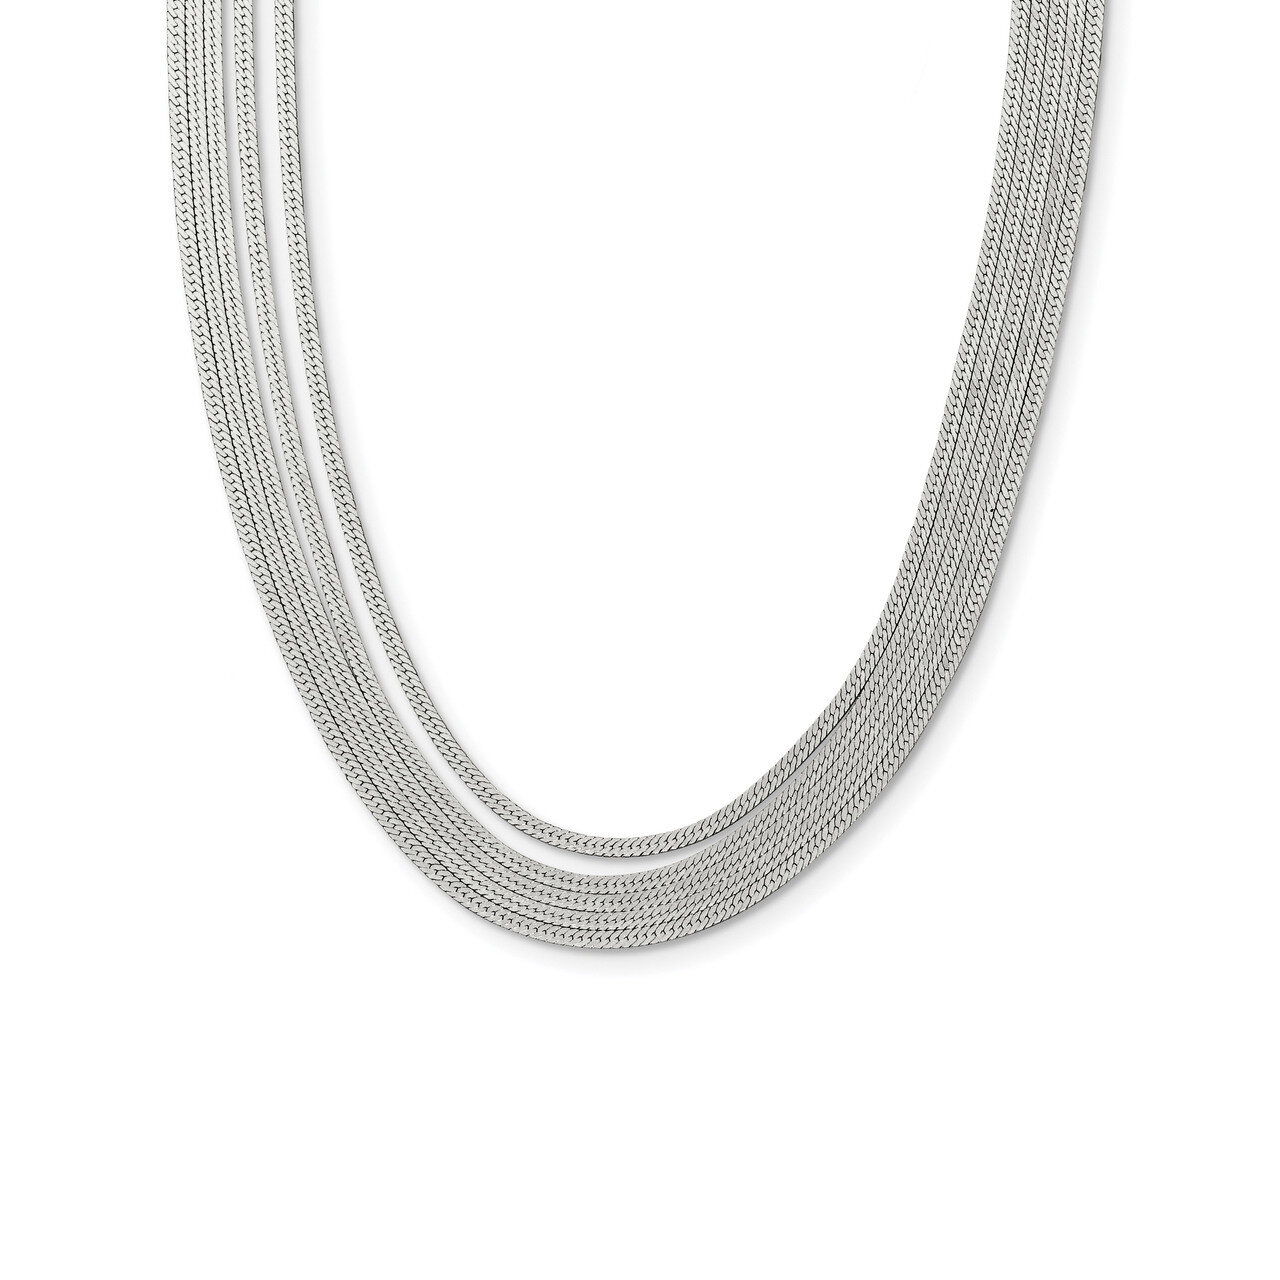 5-Strand Herringbone Chain with 2 inch Extender Necklace 17 Inch Sterling Silver QG3869-17